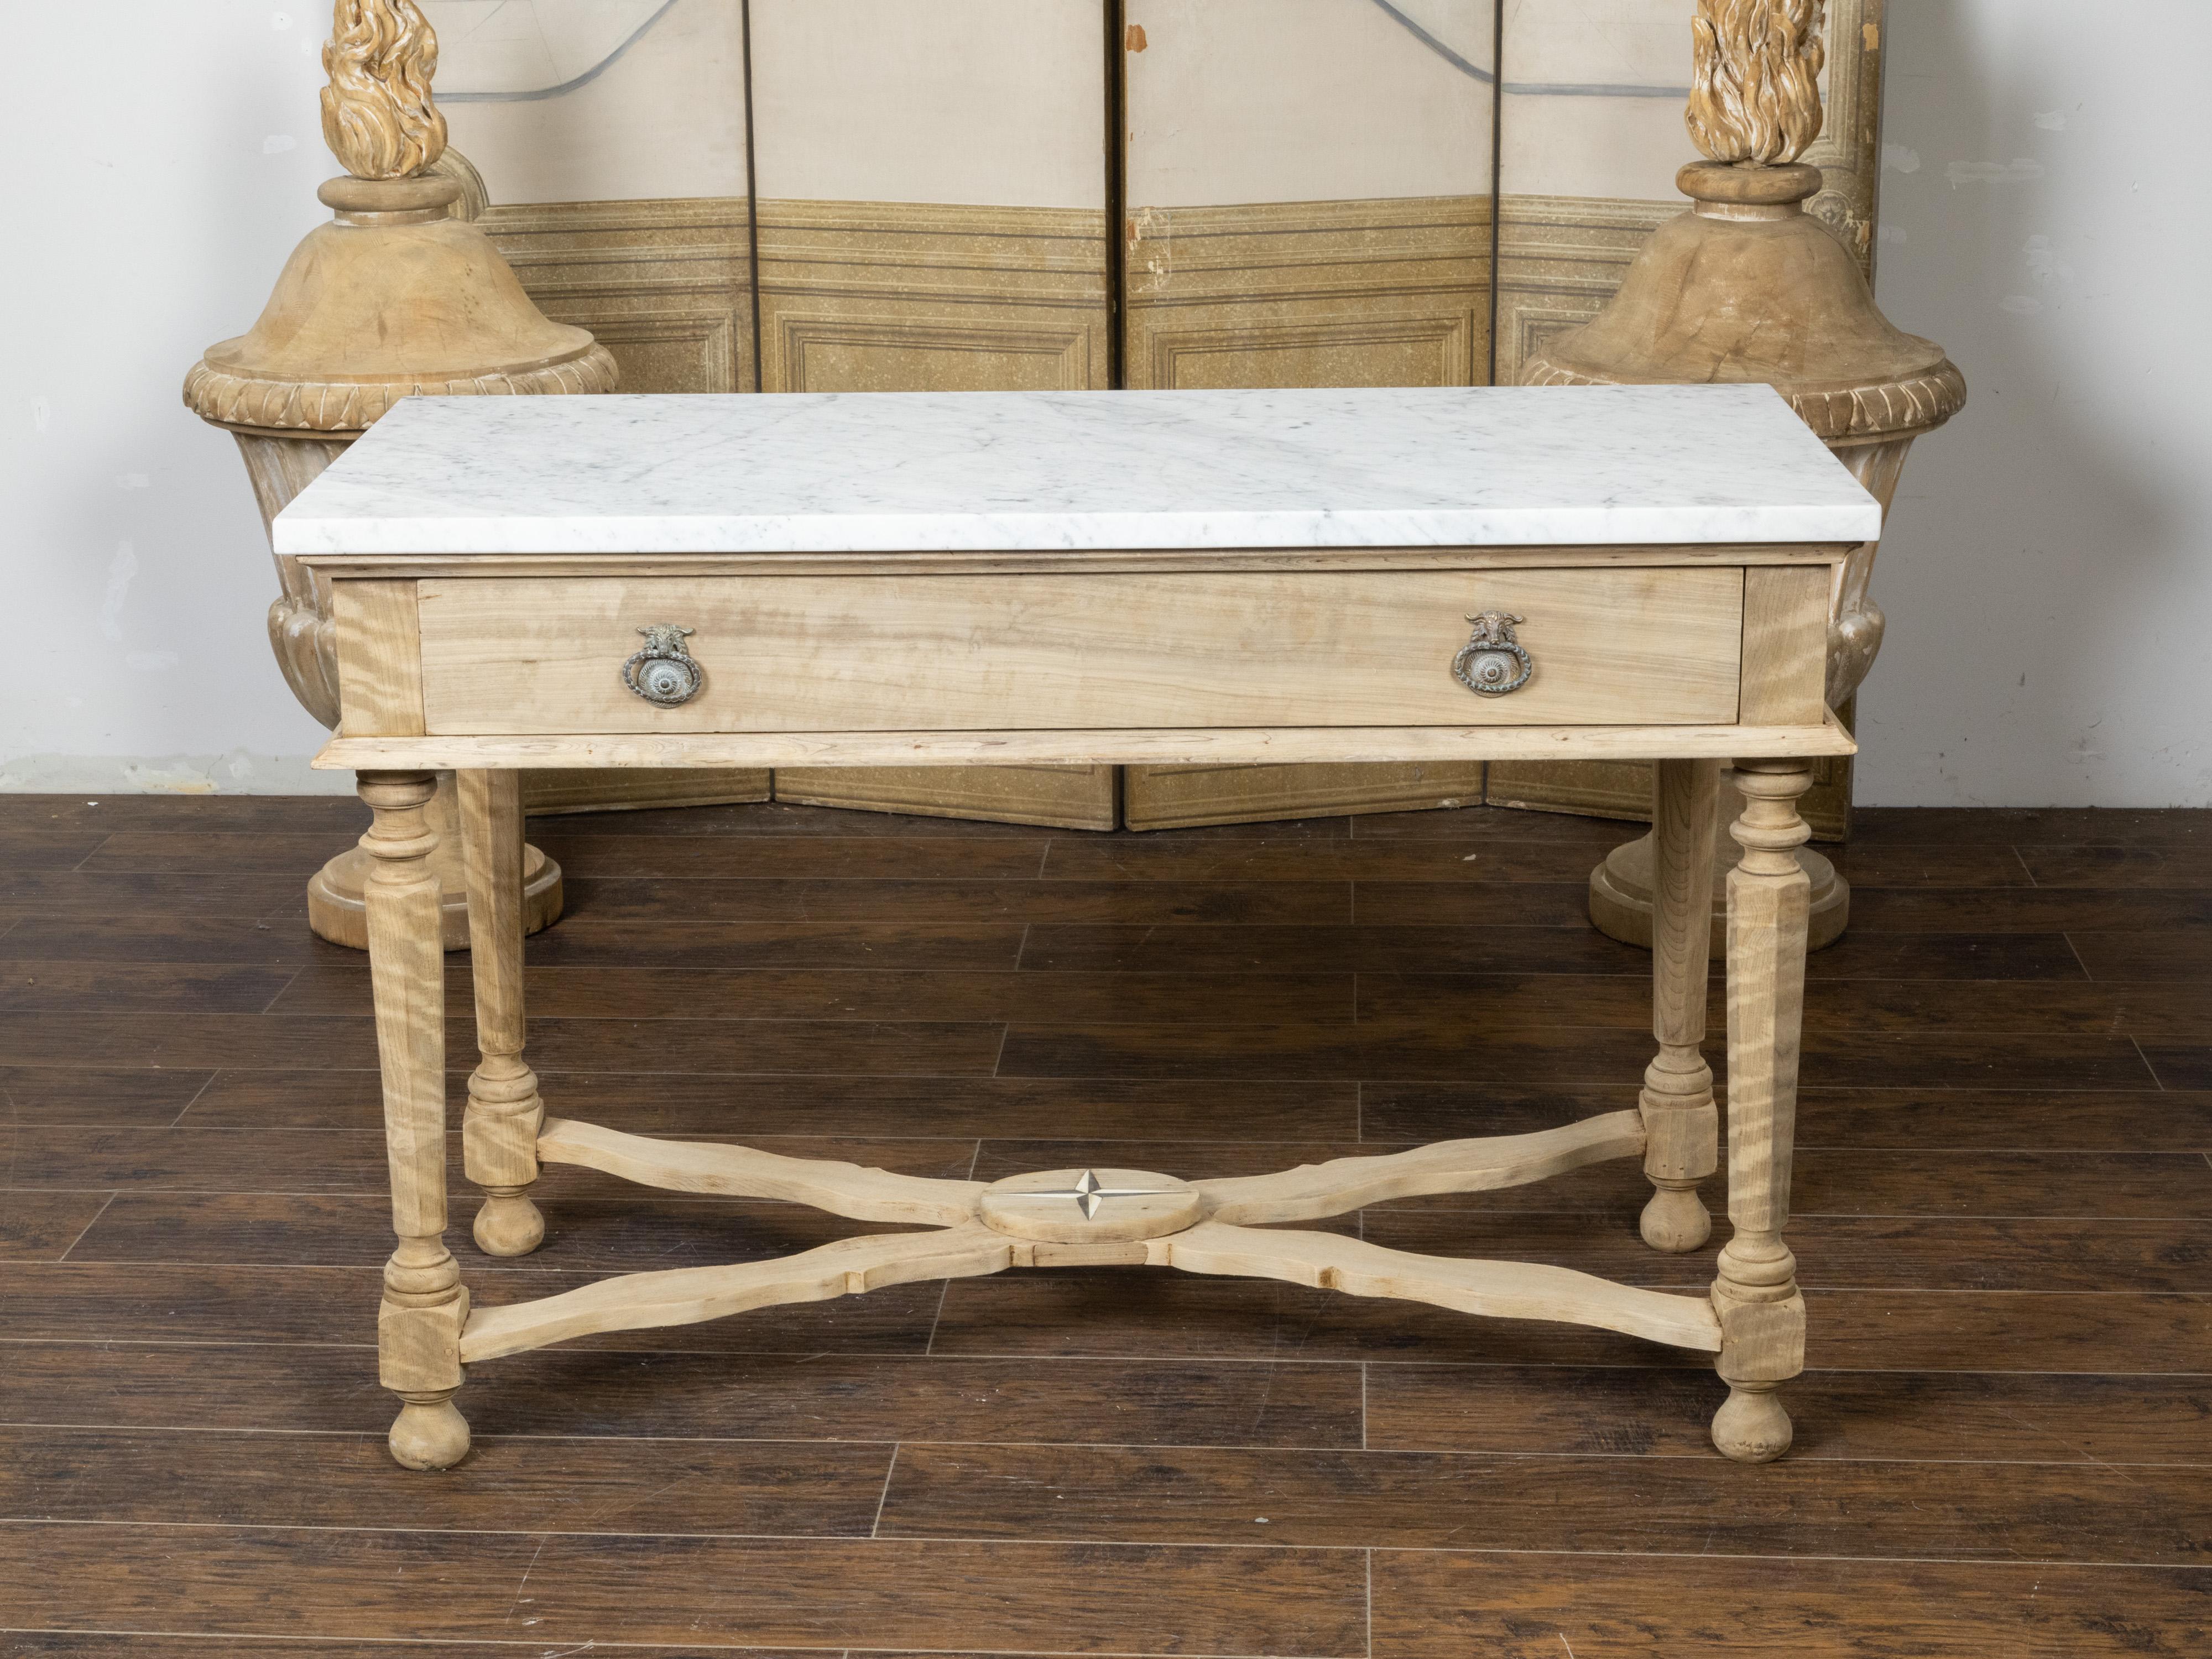 A Continental bleached walnut console table from the 19th century, with white marble top, long single drawer, faceted tapering legs and X-Form cross stretcher. Created in Continental Europe during the 19th century, this console table features a